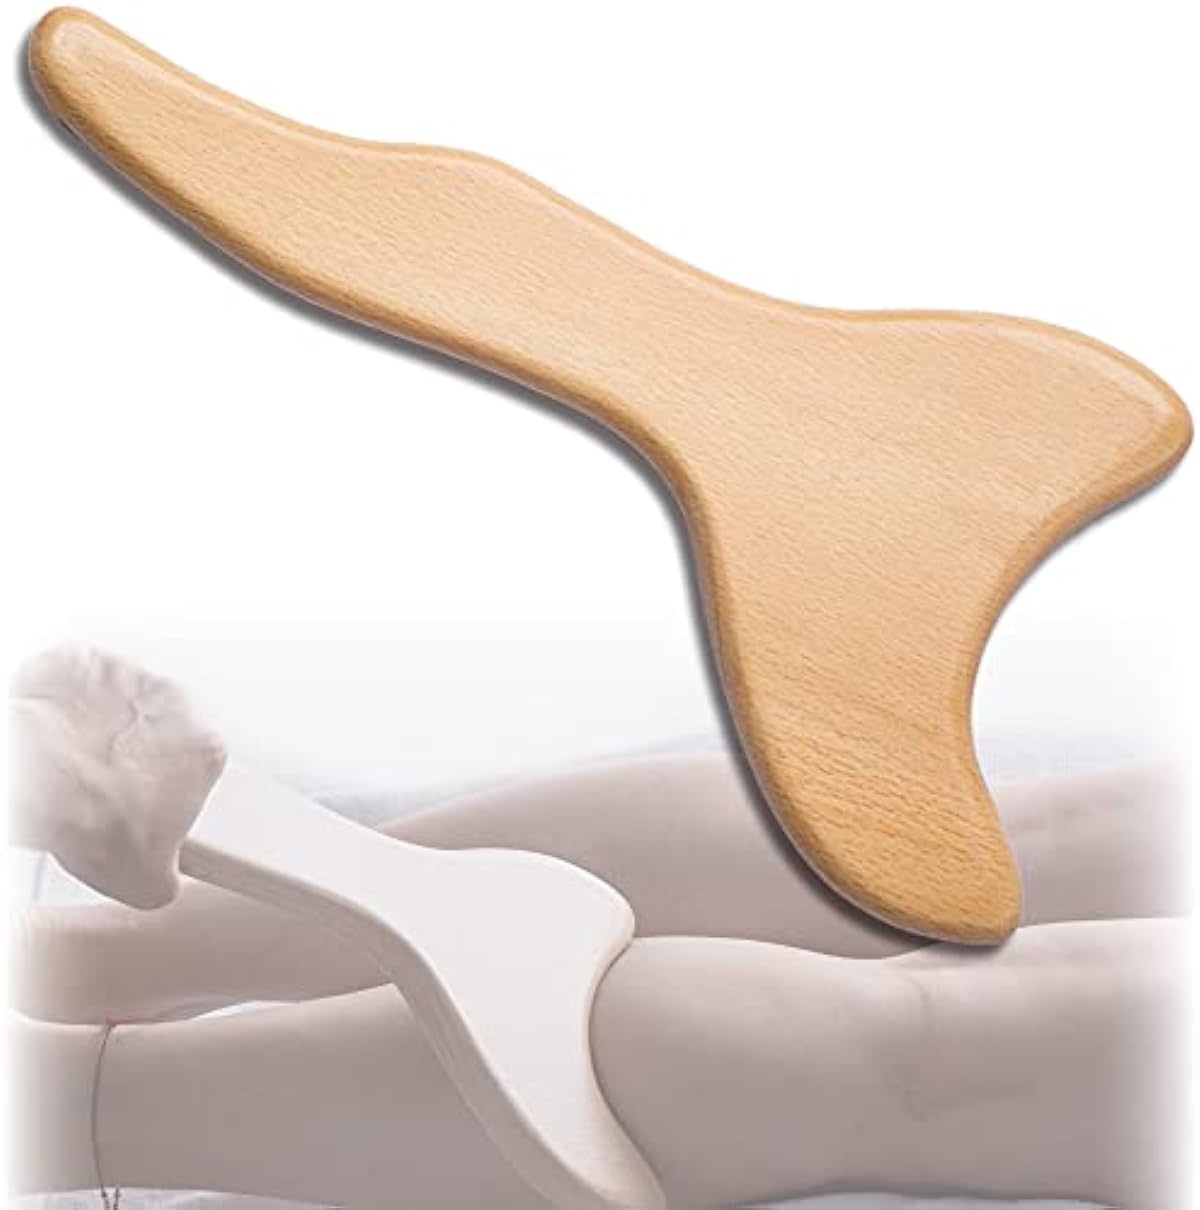 FeelFree Sport Wood Gua Sha Therapy Massage Tools - Lymphatic Drainage Tool - Anti Cellulite Paddle Massager Maderotherapy for Back, Legs, Arms (Burlywood)